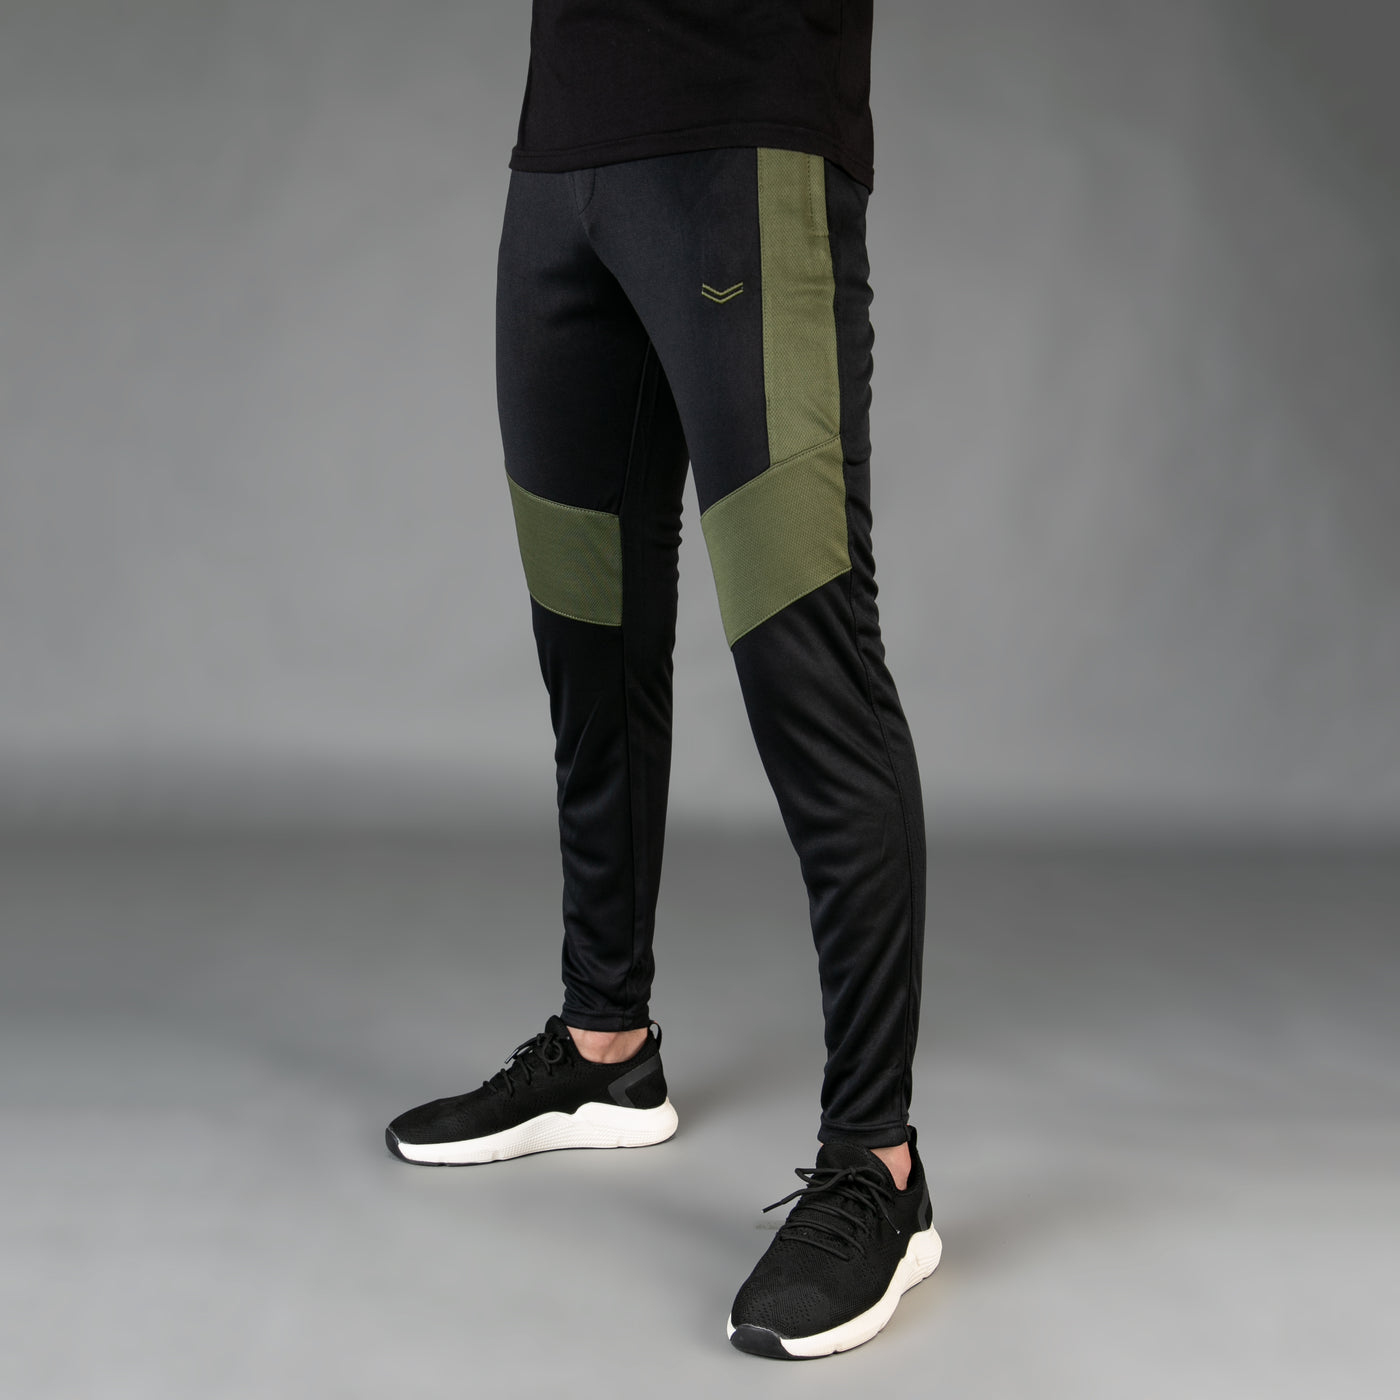 Black Quick Dry Versus Series Bottoms with Olive Mesh Panels